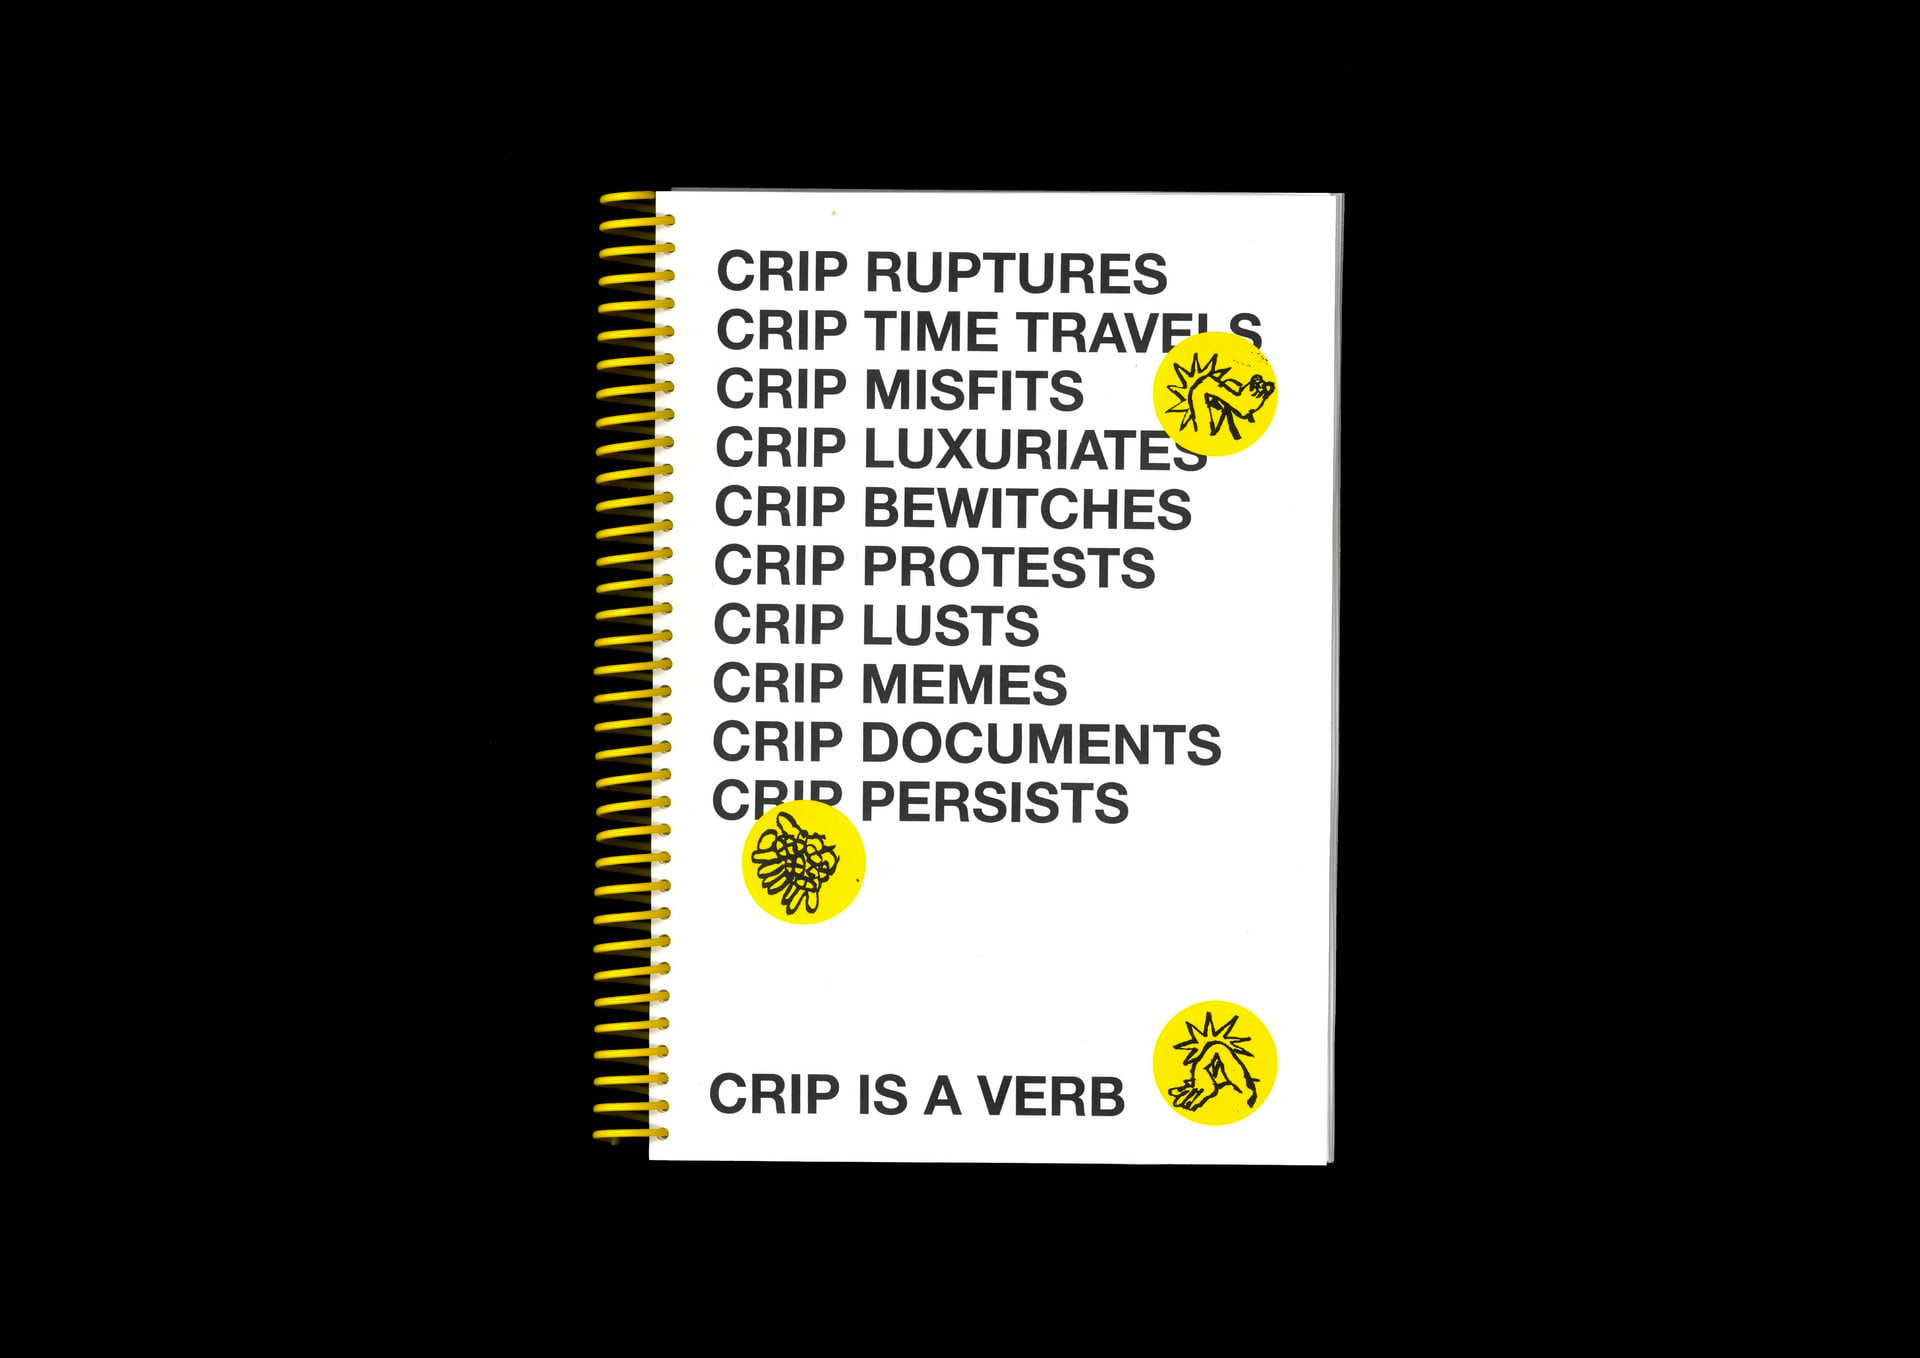 Image of a spiral bound notebook with black text on a white background, and three small round yellow stickers with images stuck on it, on a black background.